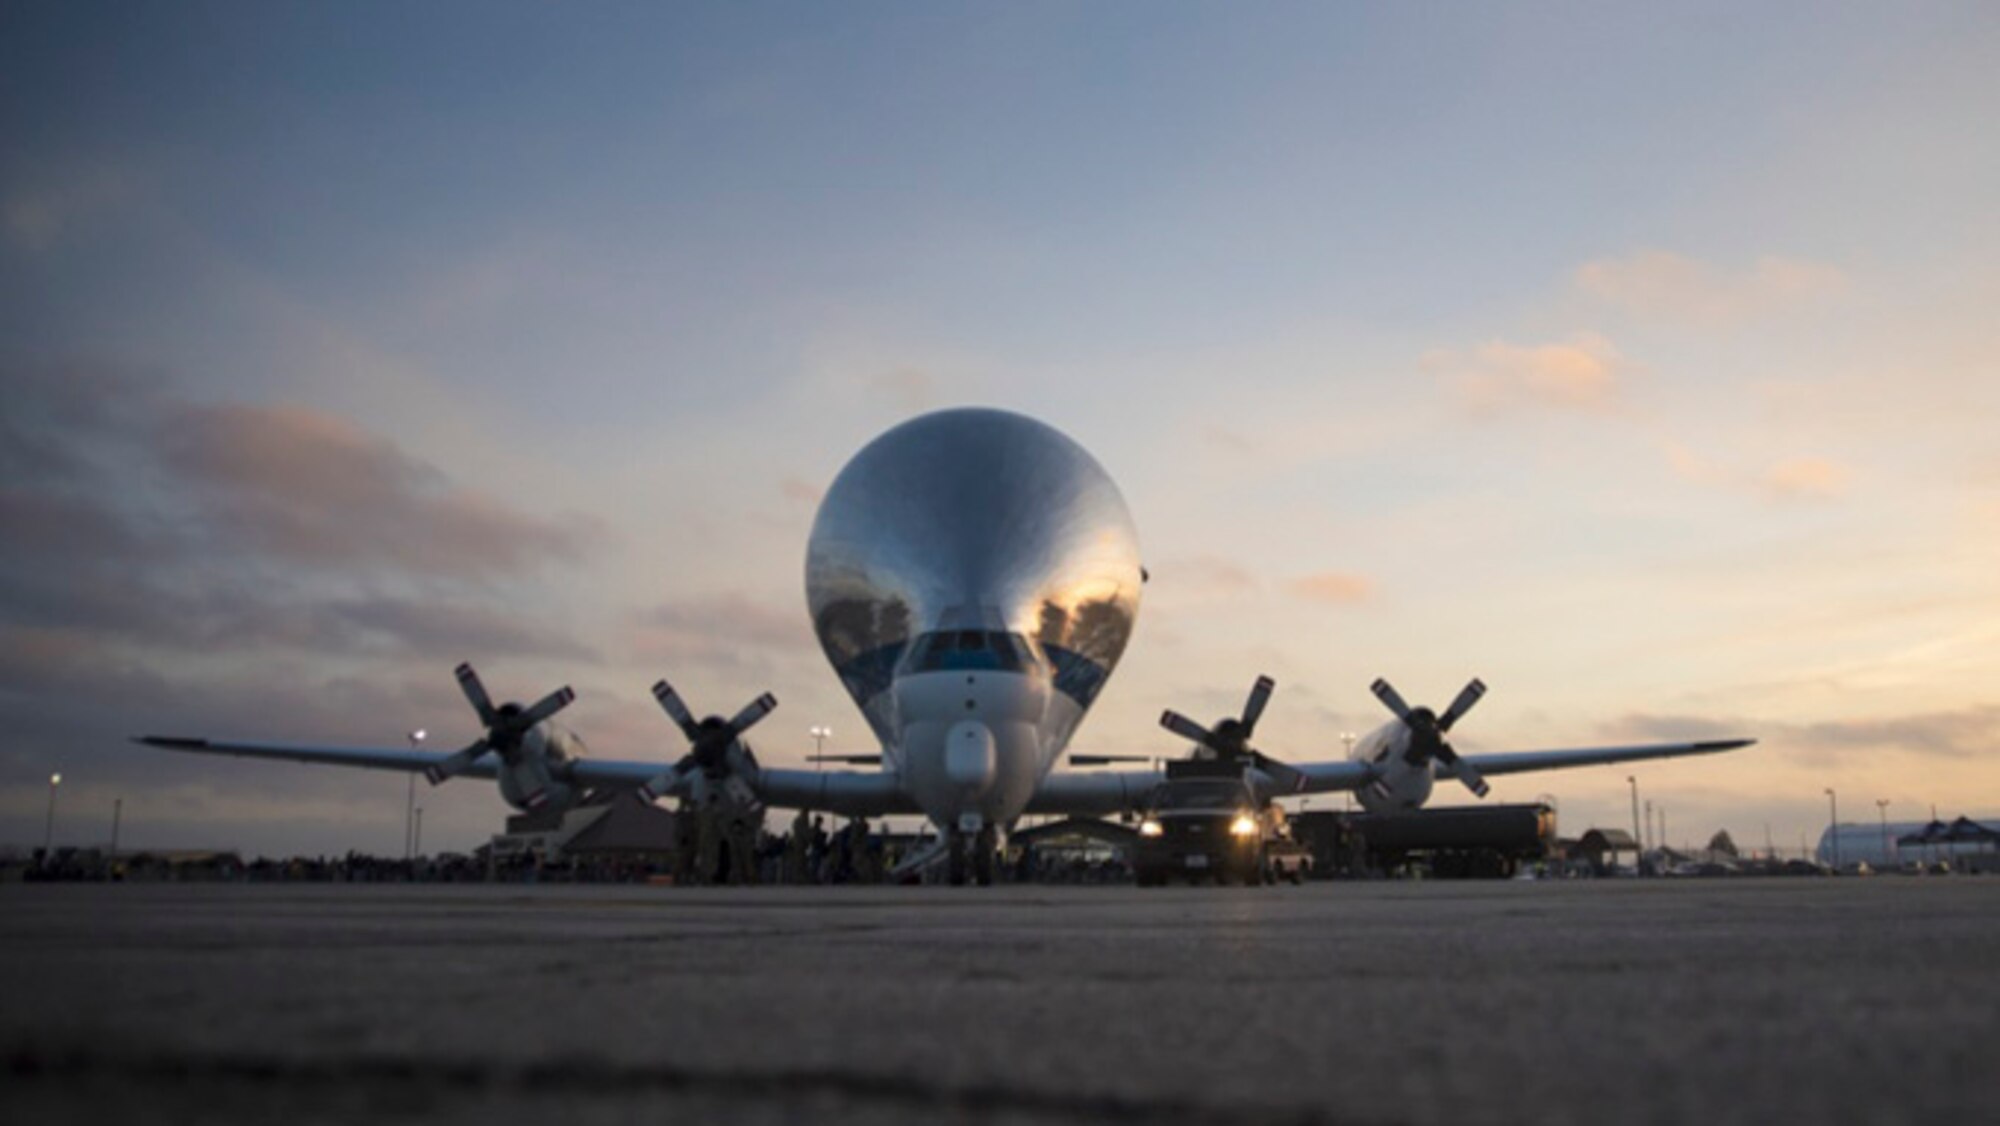 The NASA Super Guppy arrives at the 179th Airlift Wing, Ohio Air National Guard, in Mansfield, Ohio, Nov. 24, 2019. The 179th AW was assisting the NASA Super Guppy in transporting parts of the Orion Space Project to Mansfield where it could then be transported by semi-truck to the Glenn Research Center in Sandusky, Ohio. (U.S. Air National Guard photo by Tech. Sgt. Joe Harwood)